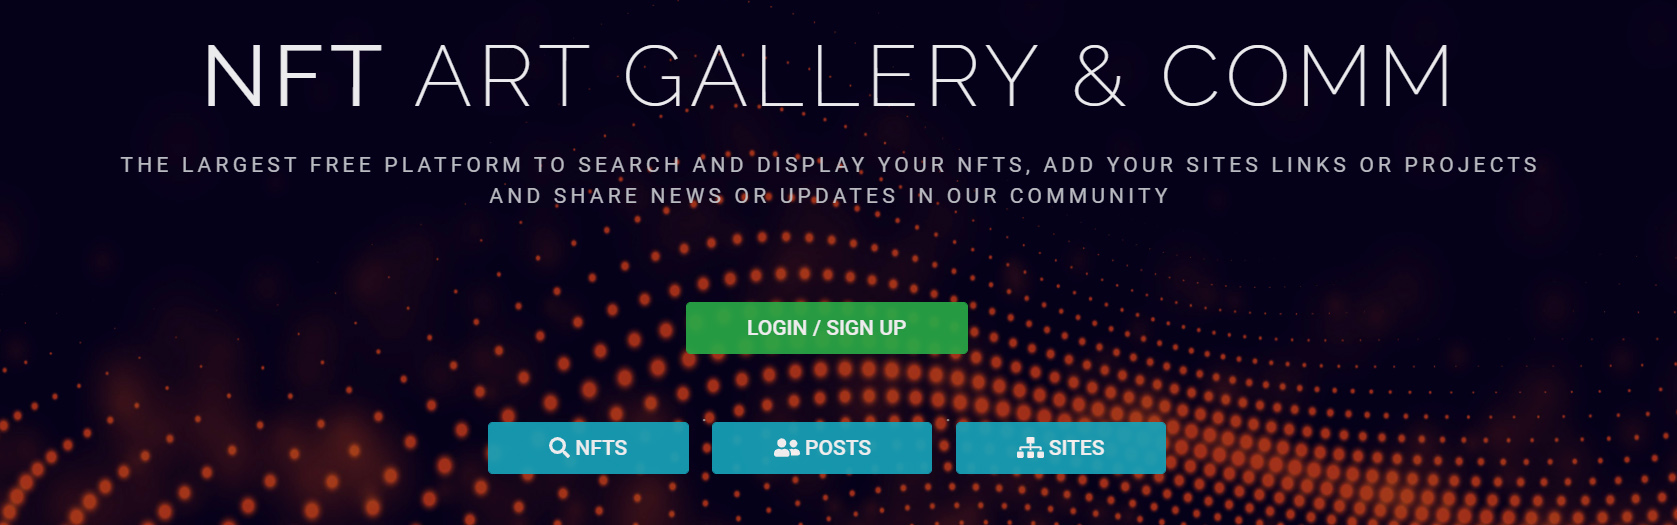 Welcome to NFT ART GALLERY & COMM